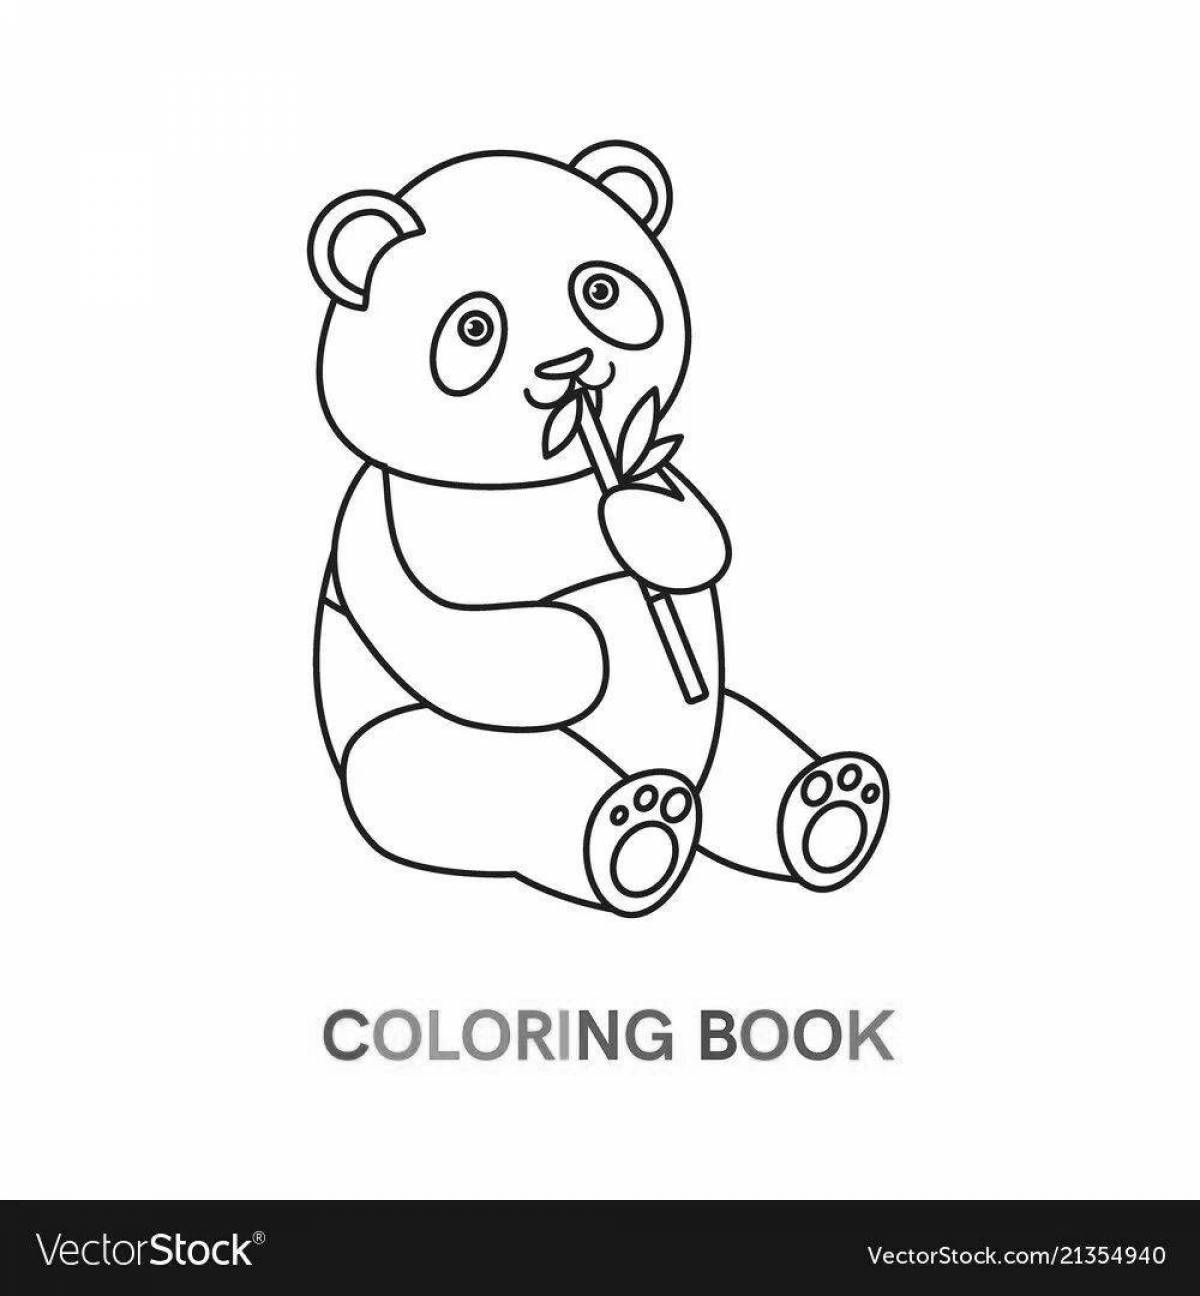 Colorful panda coloring book with bamboo